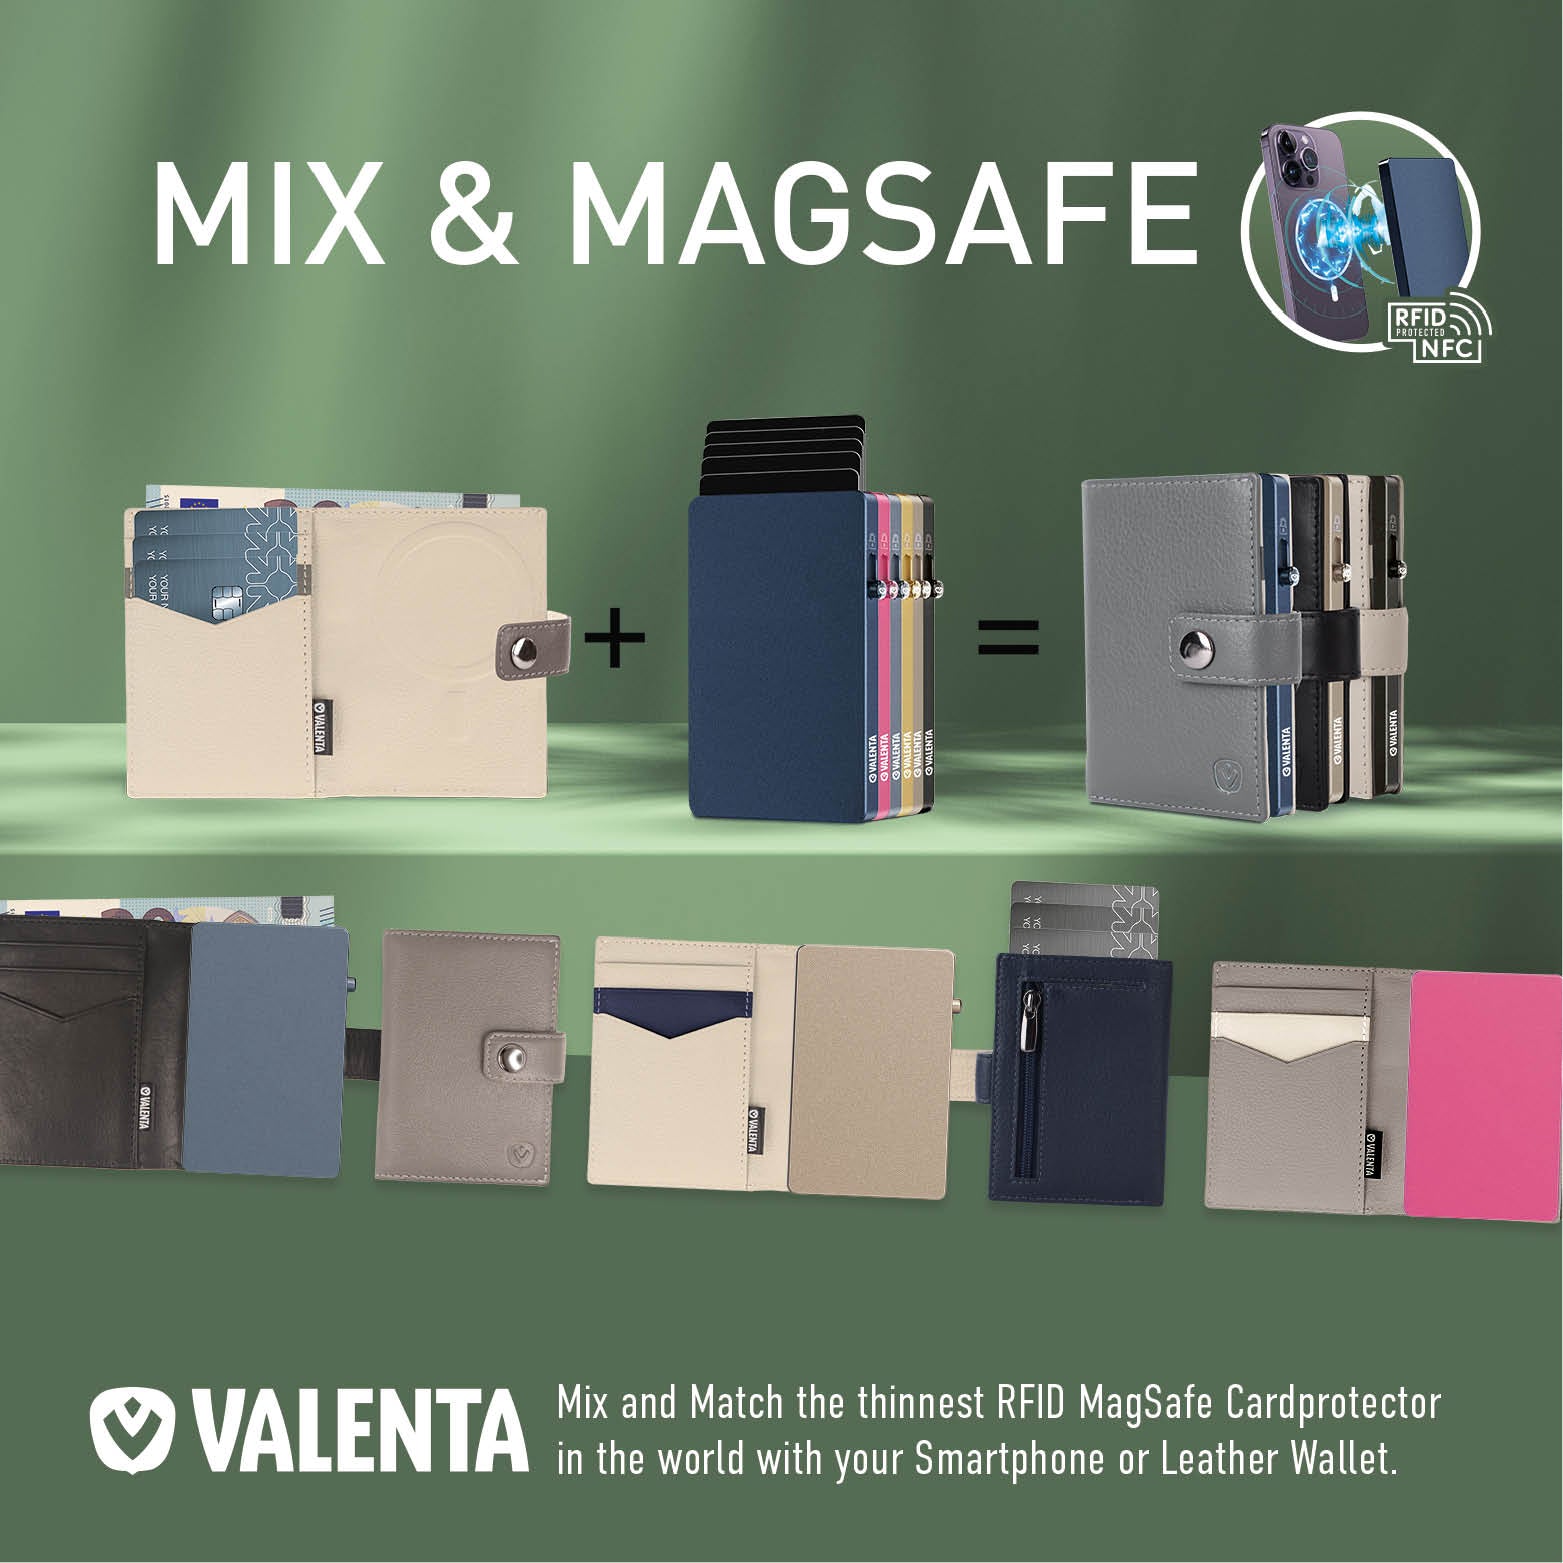 Valenta - Mix and Match the thinnest RFID MagSafe Cardprotector in the world with your Smartphone or Leather Wallet.